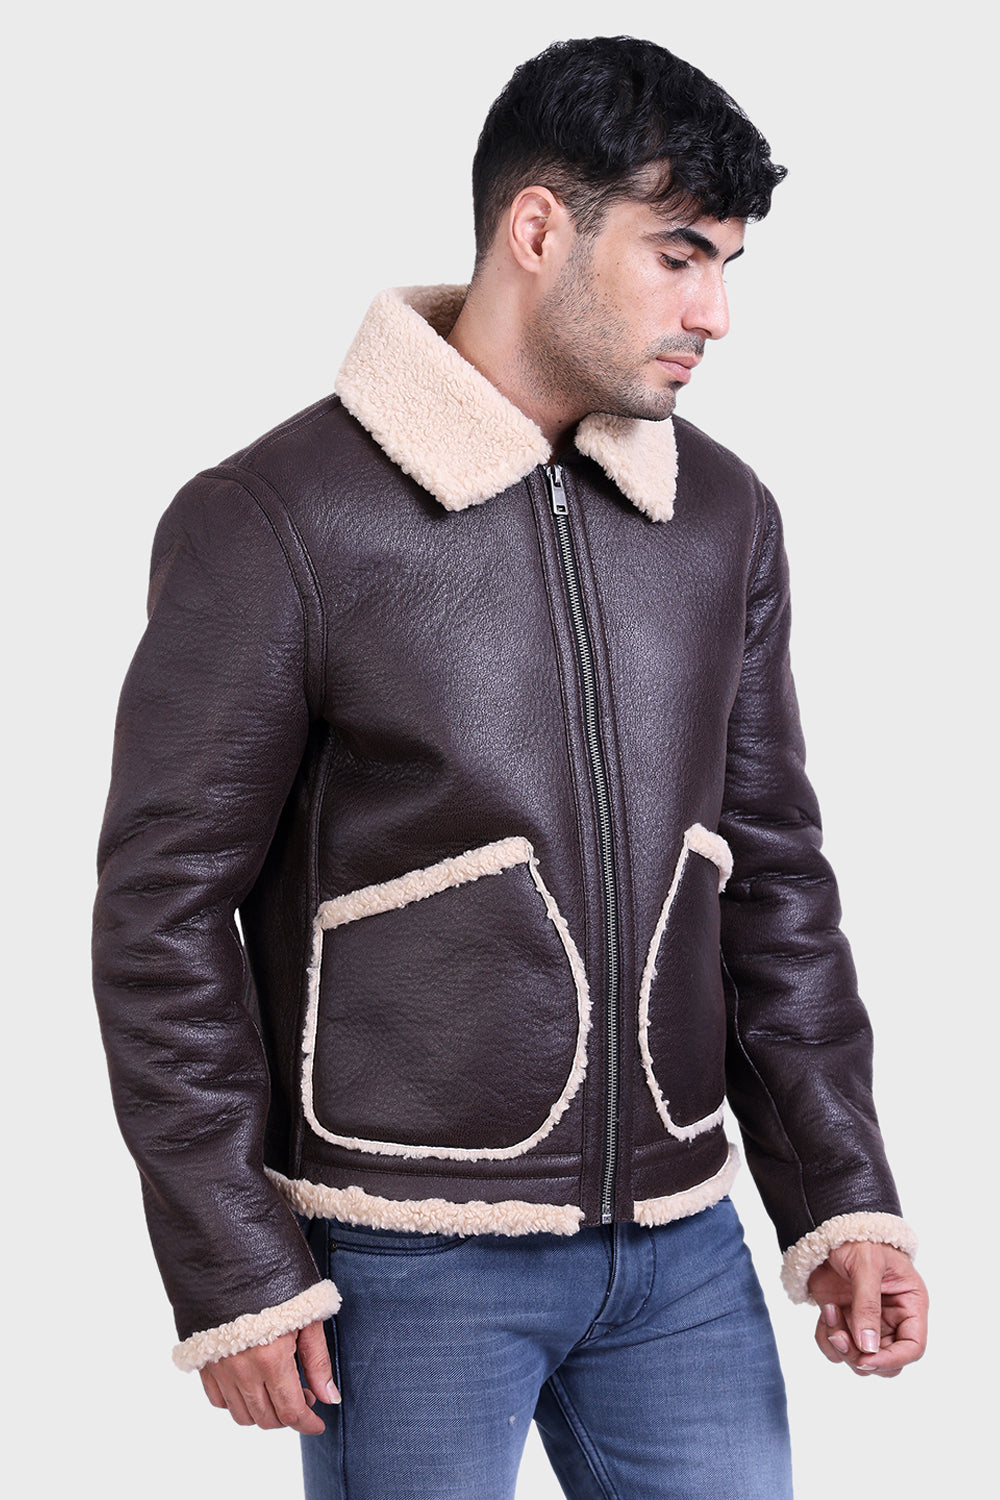 Justanned Faux Fur Top Gun Leather Jacket